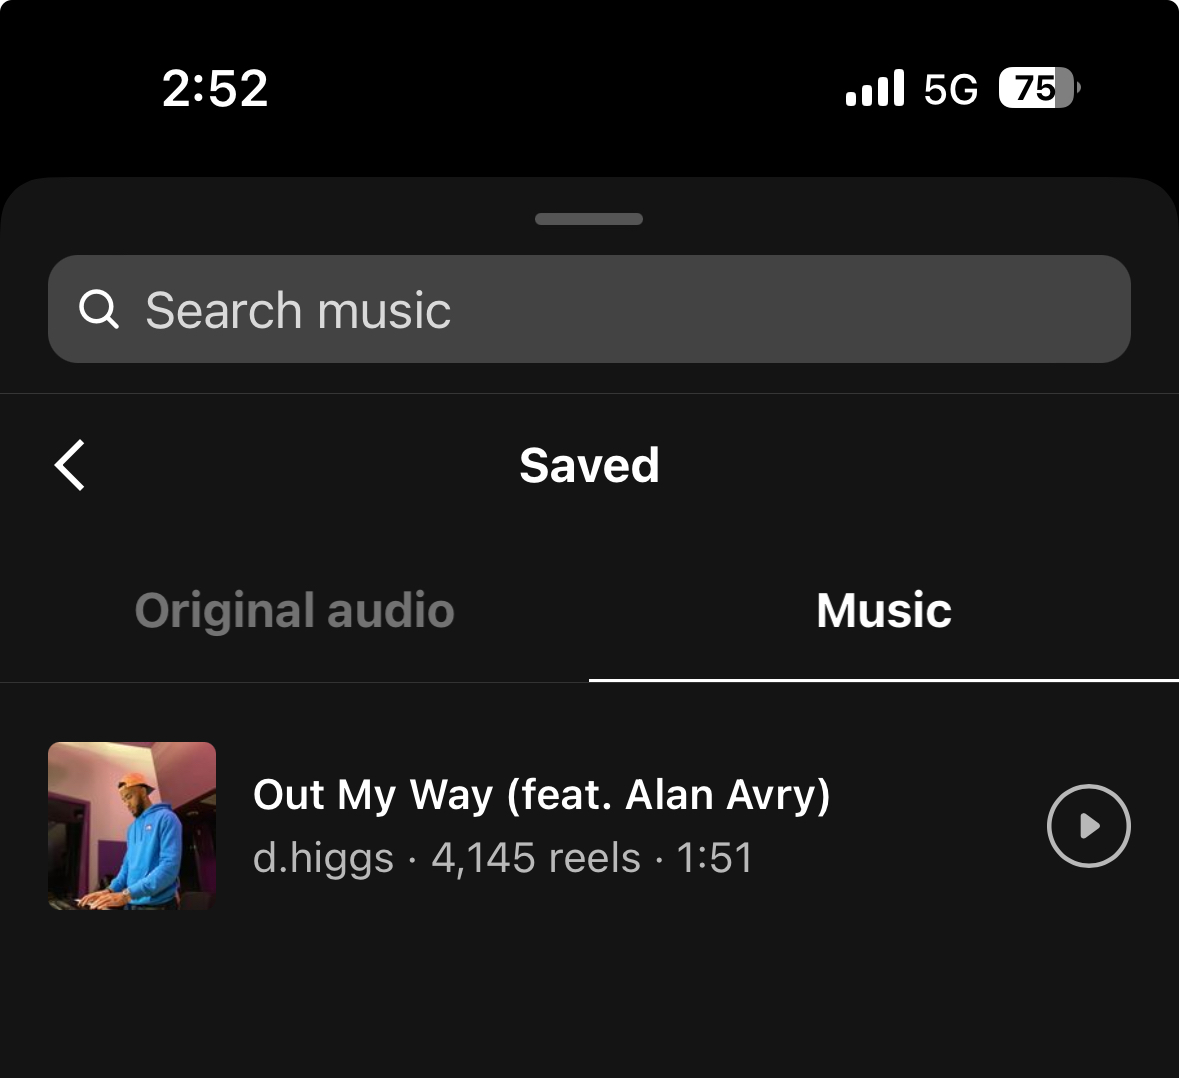 How to Save Music and Use the "Saved Music" Feature on Instagram 4